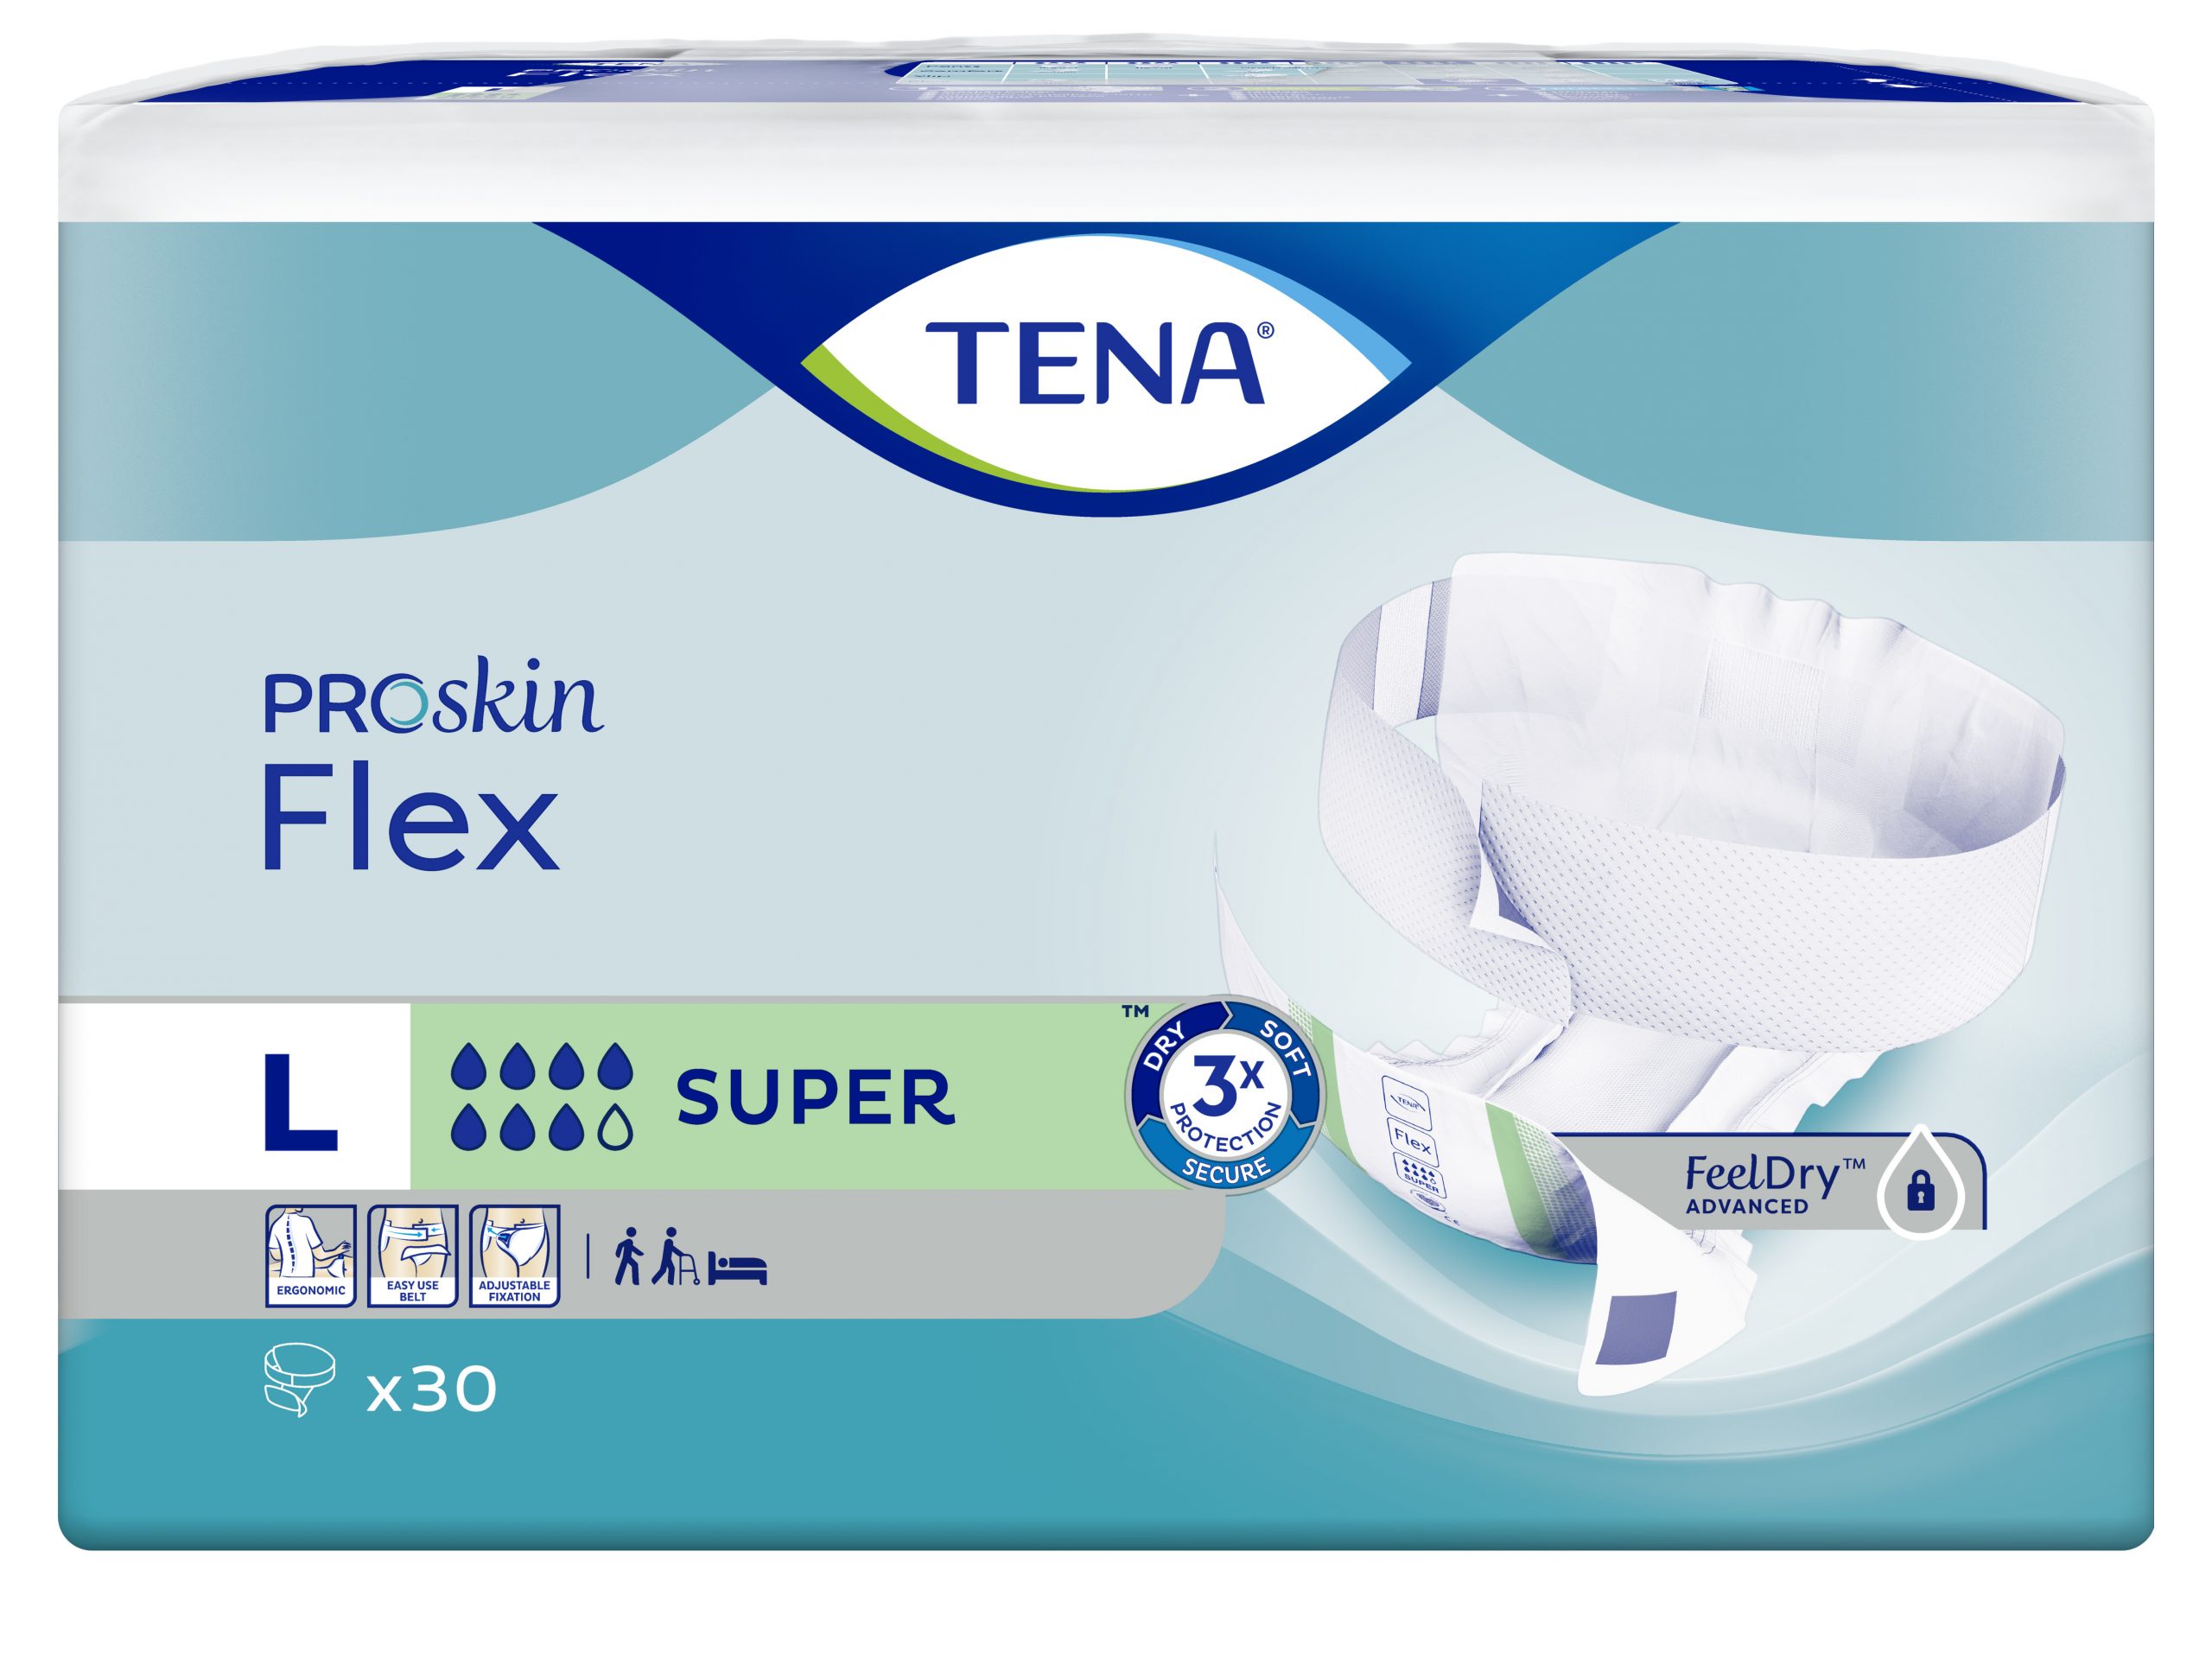 TENA ProSkin Flex Super Brief, Moderate Absorbency, Size 16/Large, 67806 Case of 90